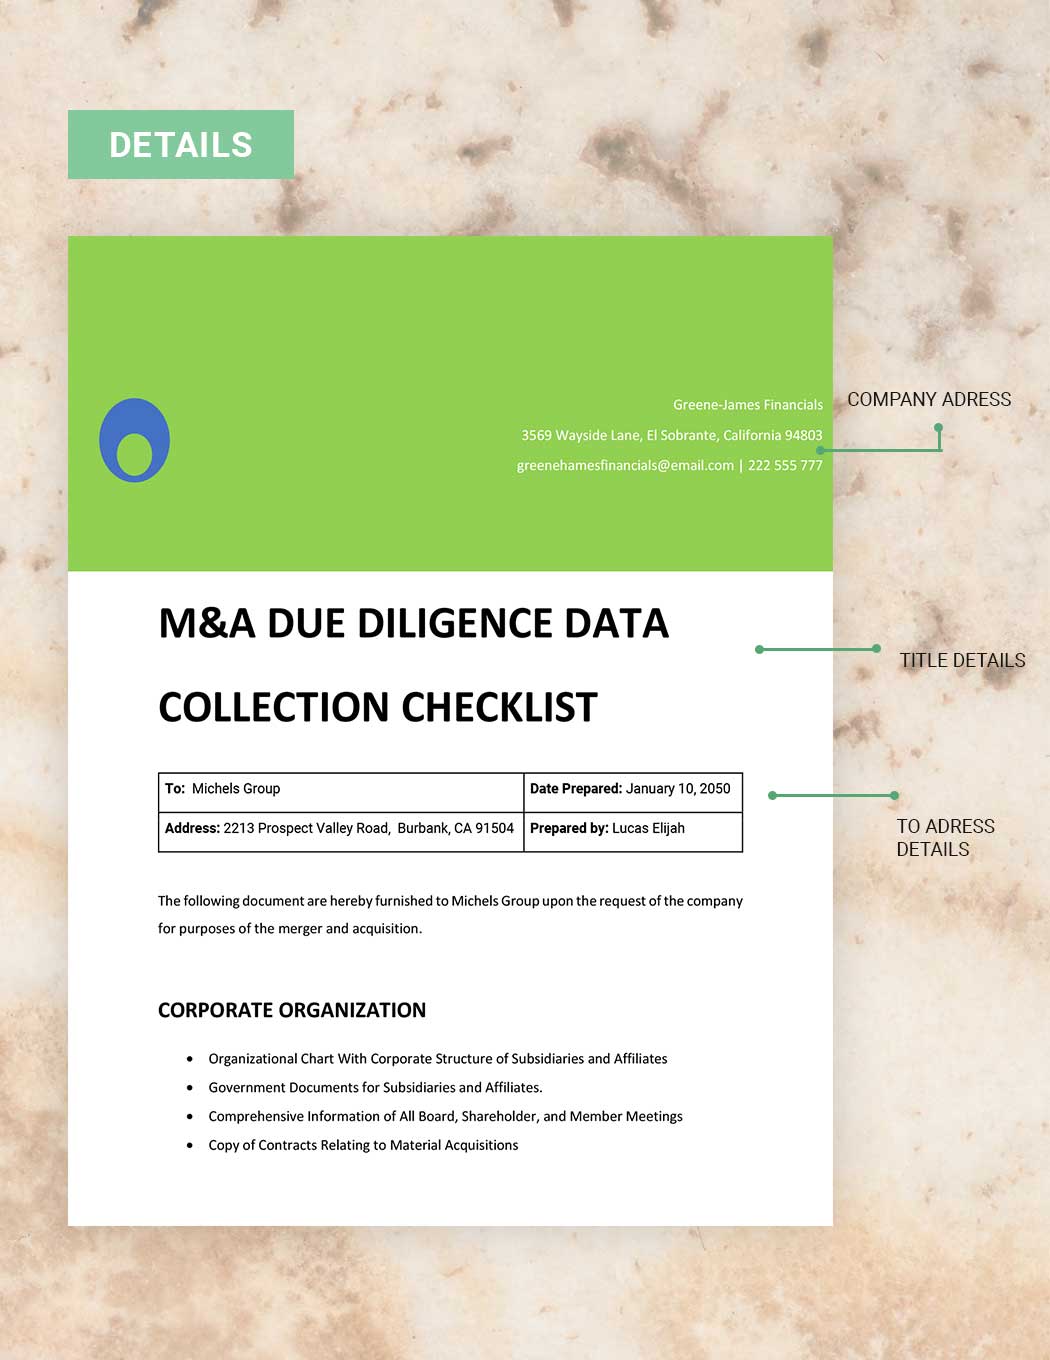 M&A Due Diligence Data Collection